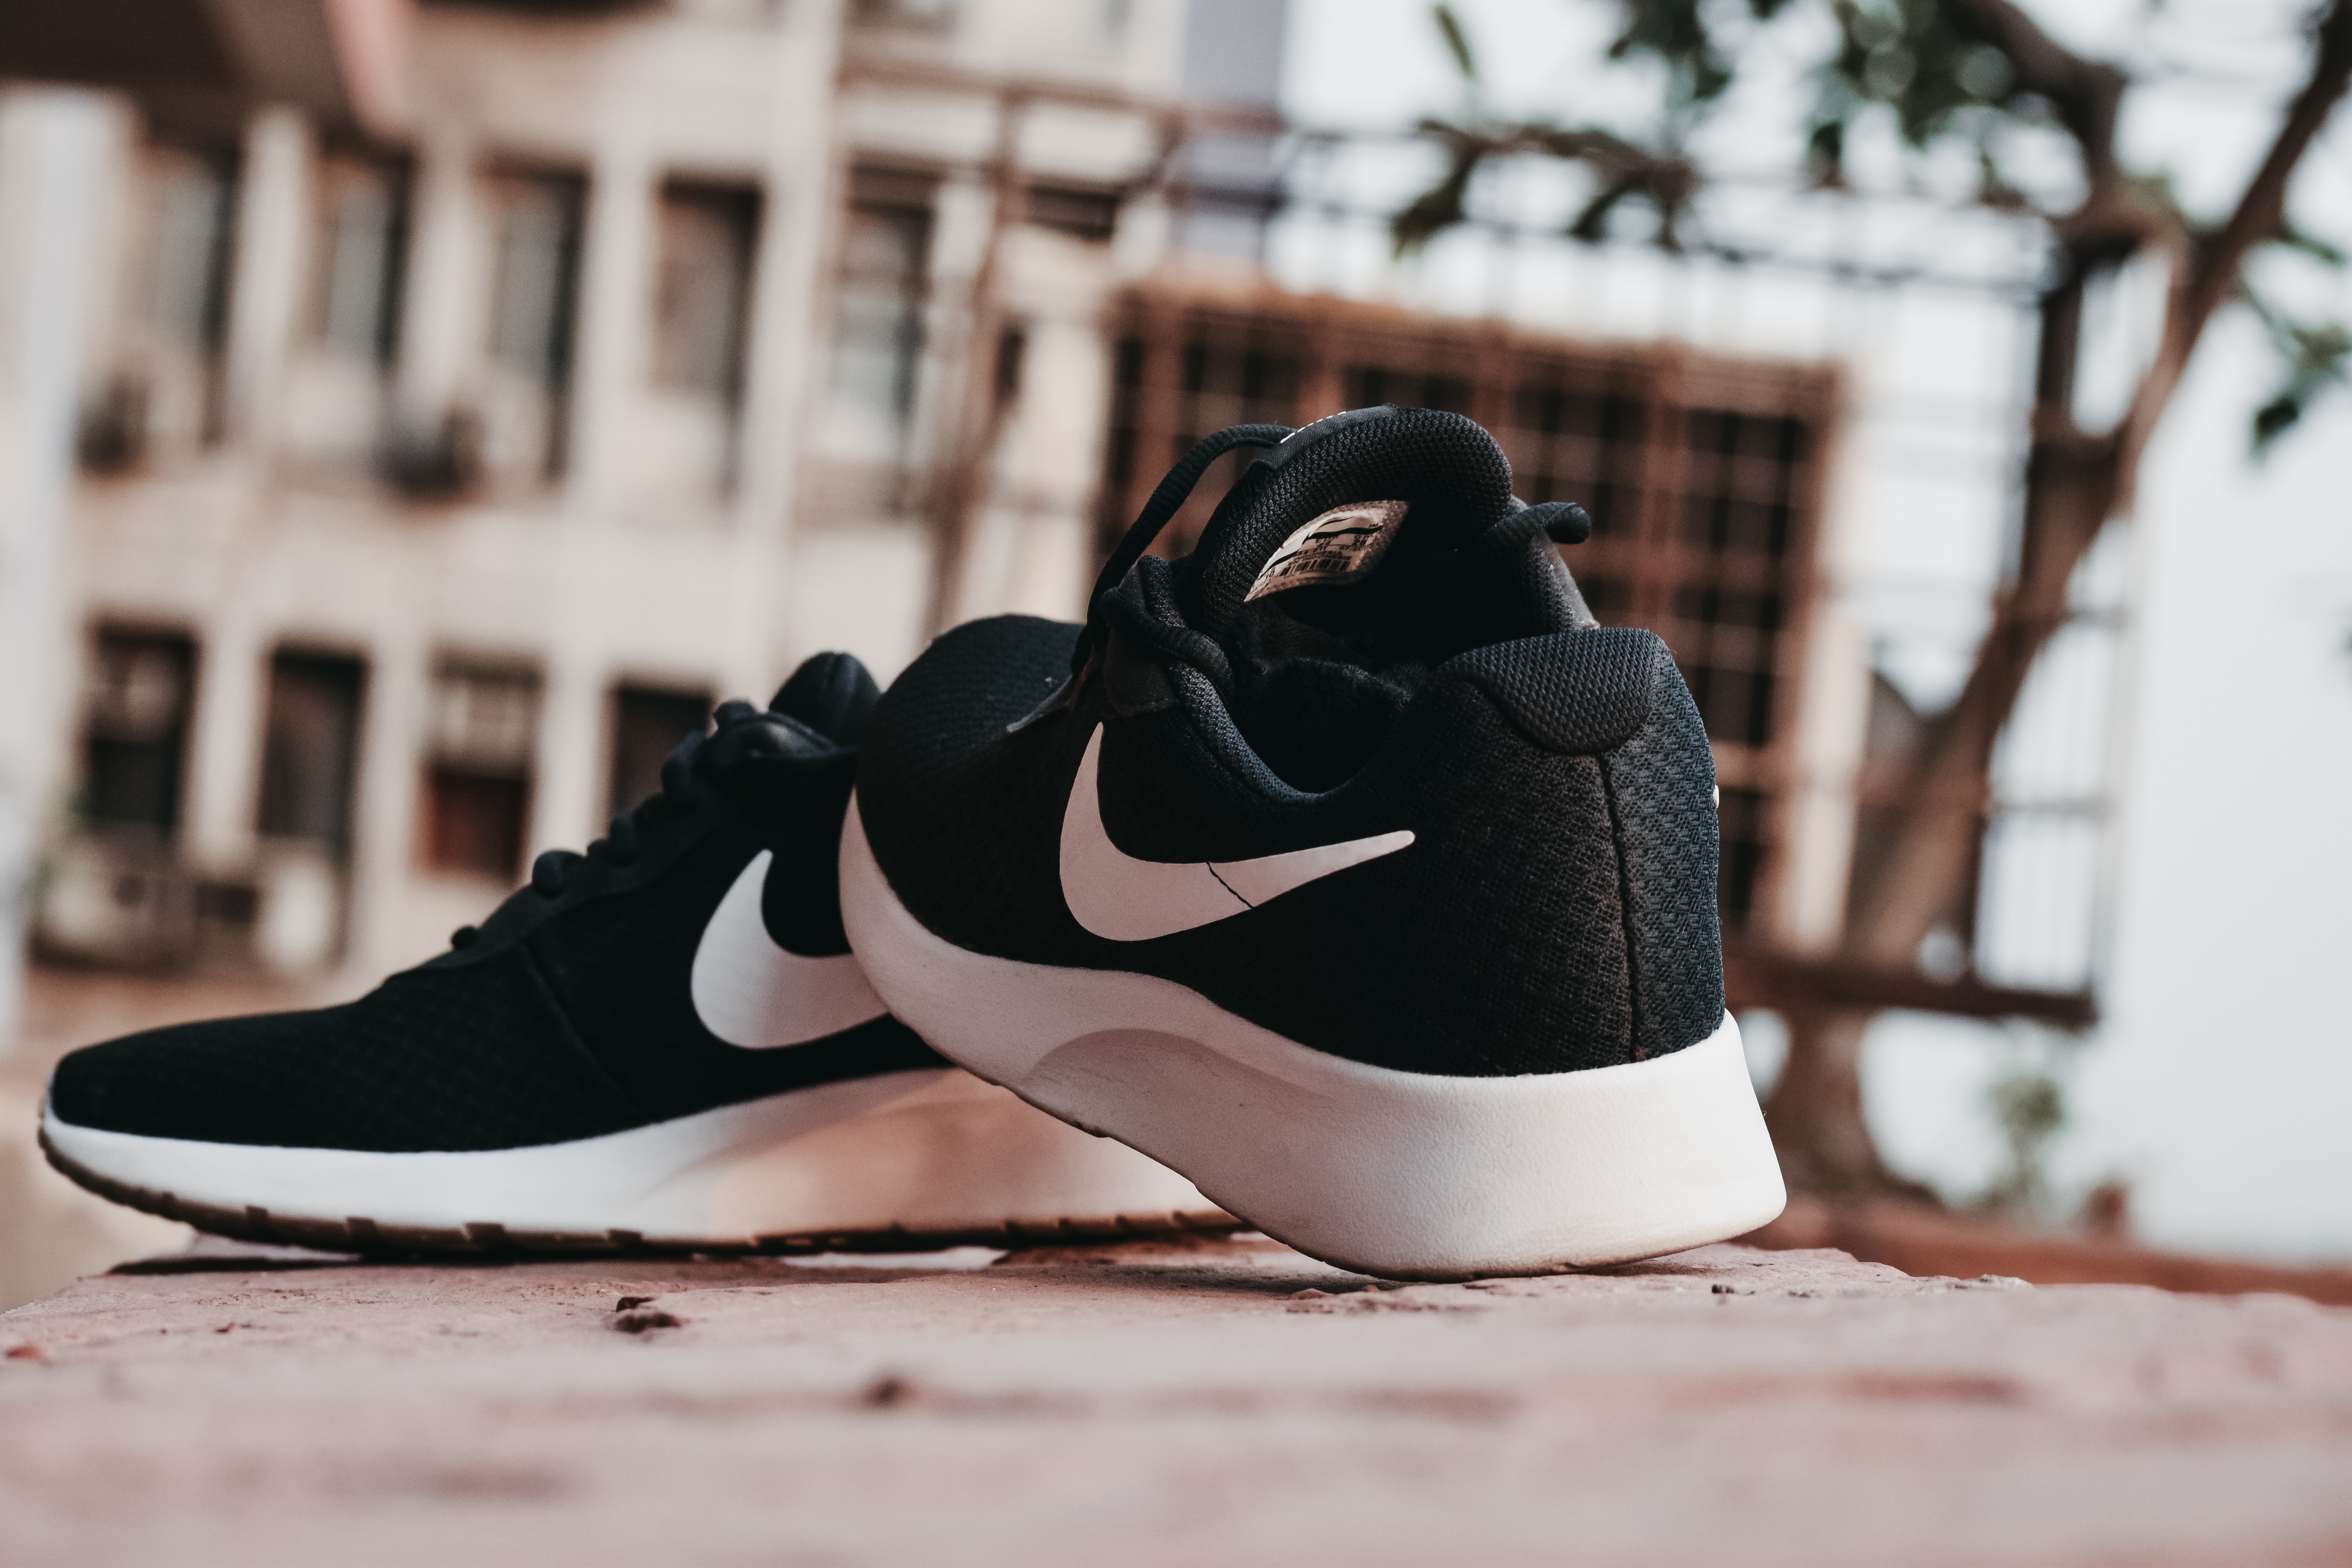 Nike Shoes Hd Wallpapers